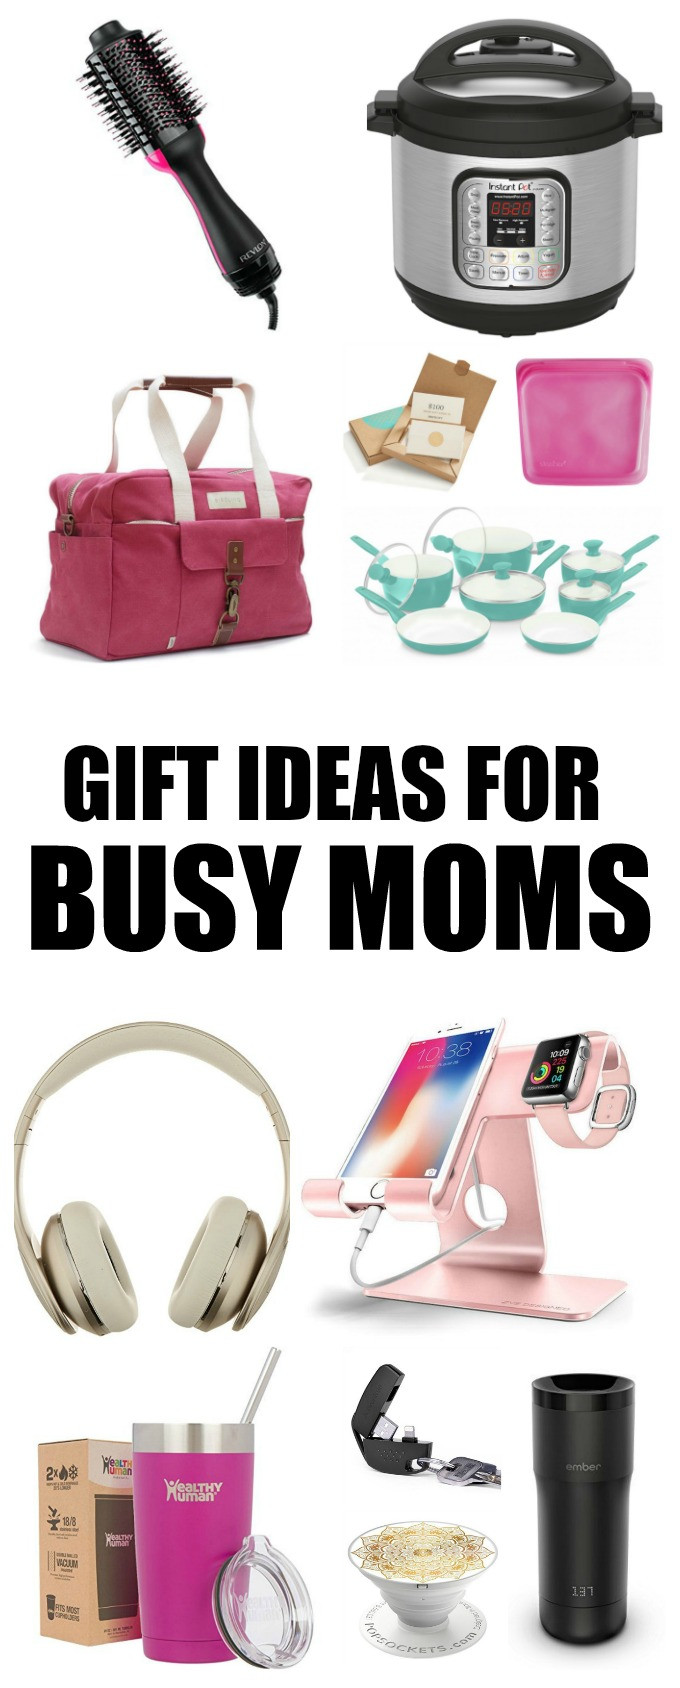 Holiday Gift Ideas For Mom
 Gift Ideas For Busy Moms